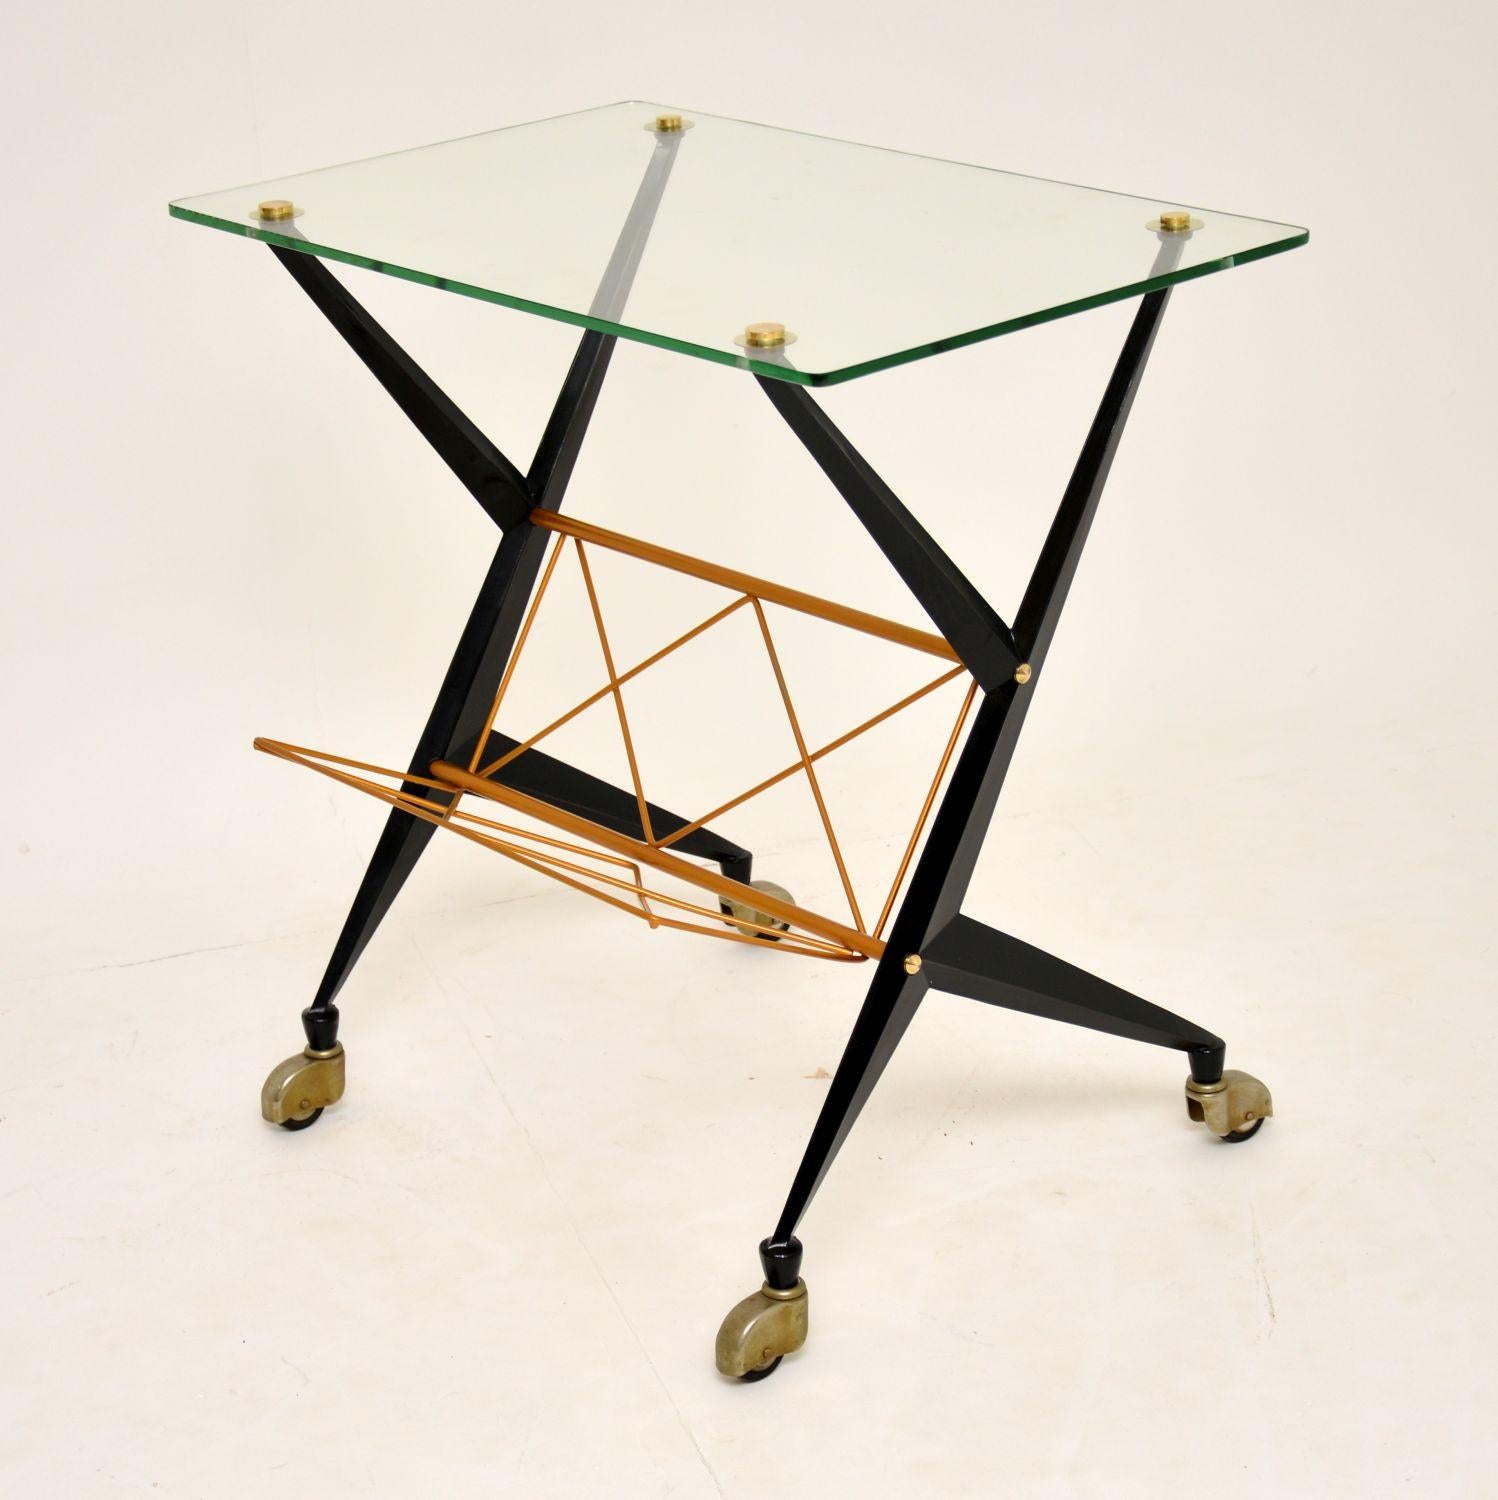 A stunning vintage Italian side table, designed by Angelo Ostuni for Frangi Milano. This dates from the 1960s-1970s, and is in superb condition for its age. The black lacquered metal frame has been and re-finished the gold magazine rack. The glass